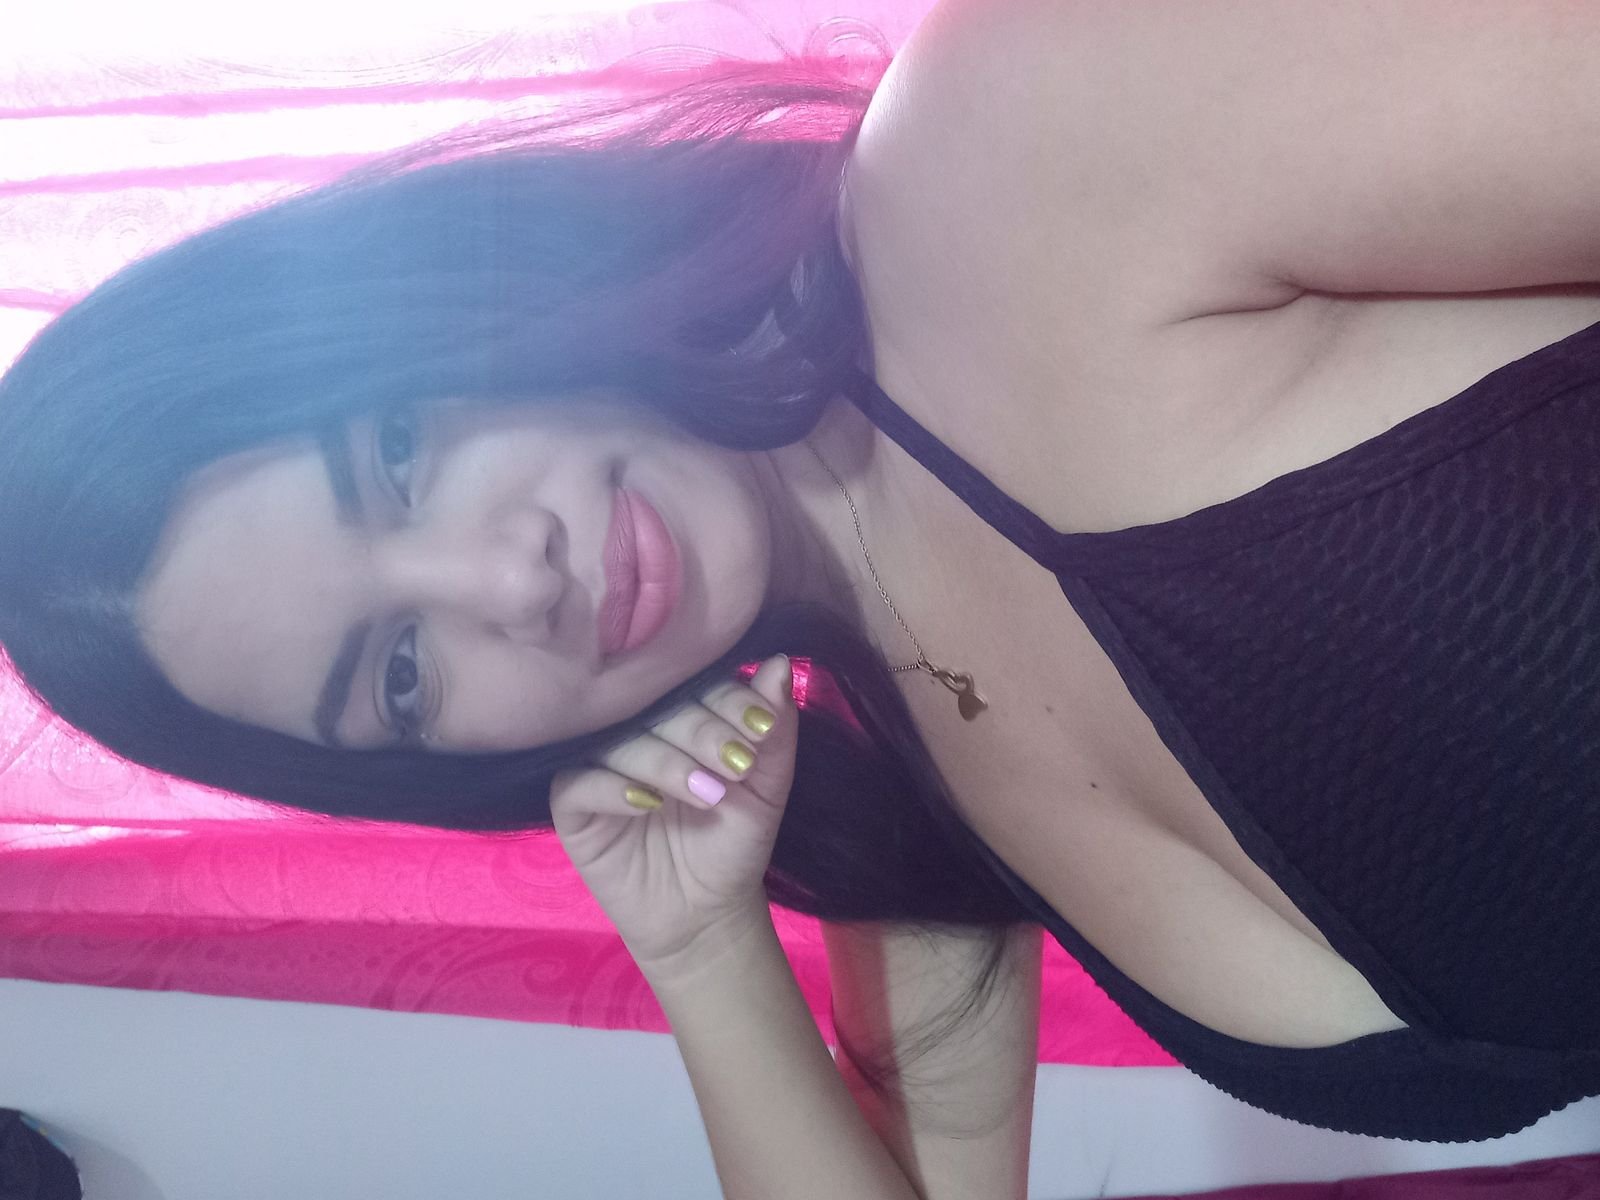 SkyPrivate live sex chat with candy love